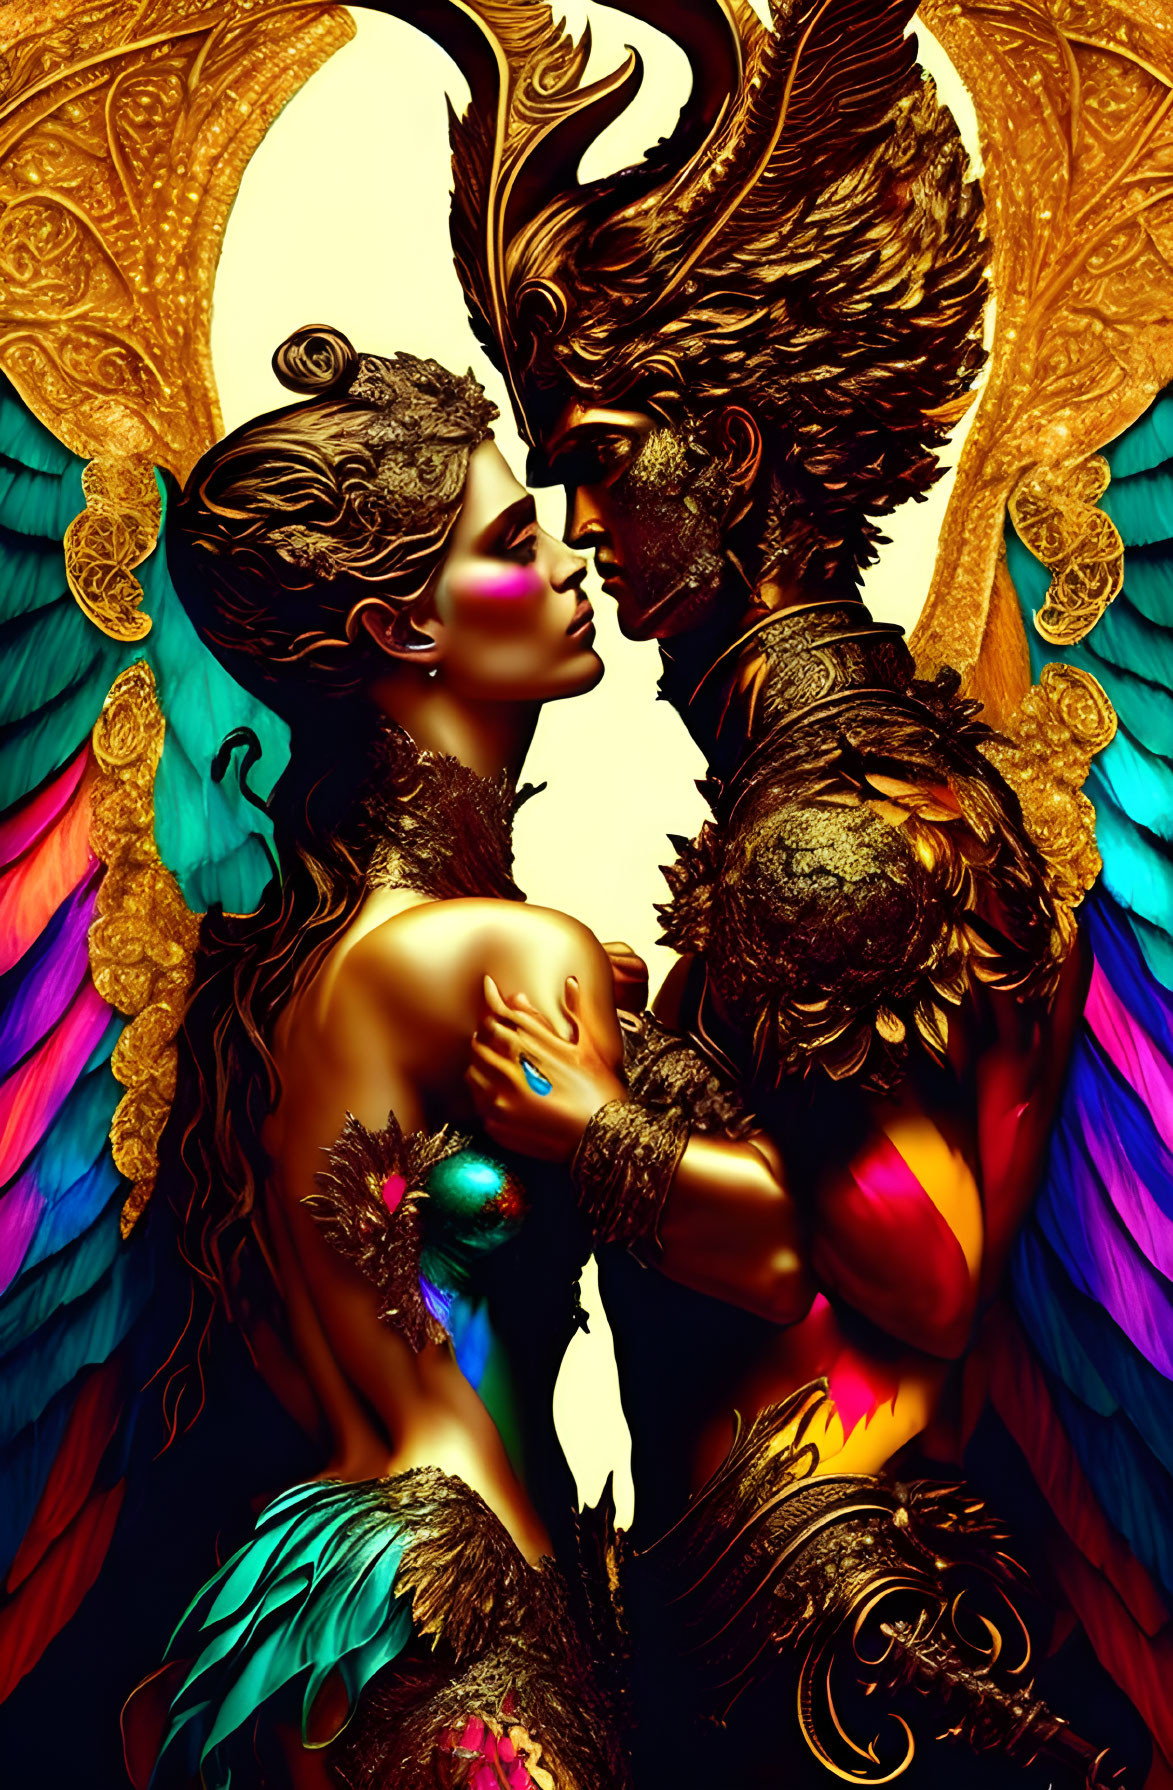 Detailed male and female figures with ornate headdresses, vibrant wings, and golden armor in close stance